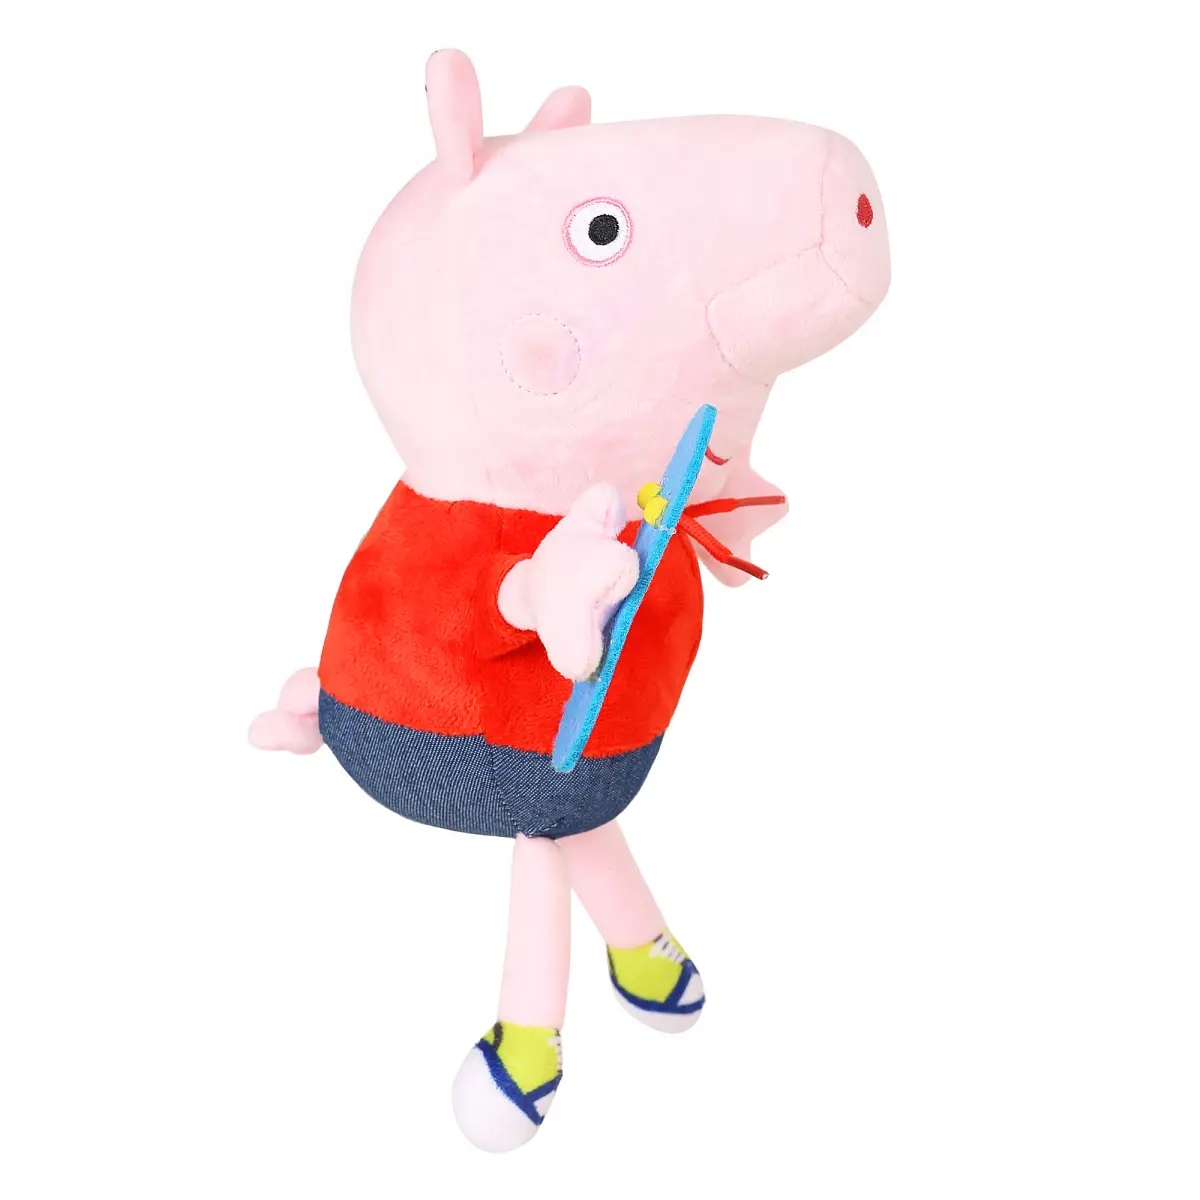 Peppa Pig Fancy George Soft Toy for Kids, 30cm, 18M+, Multicolour